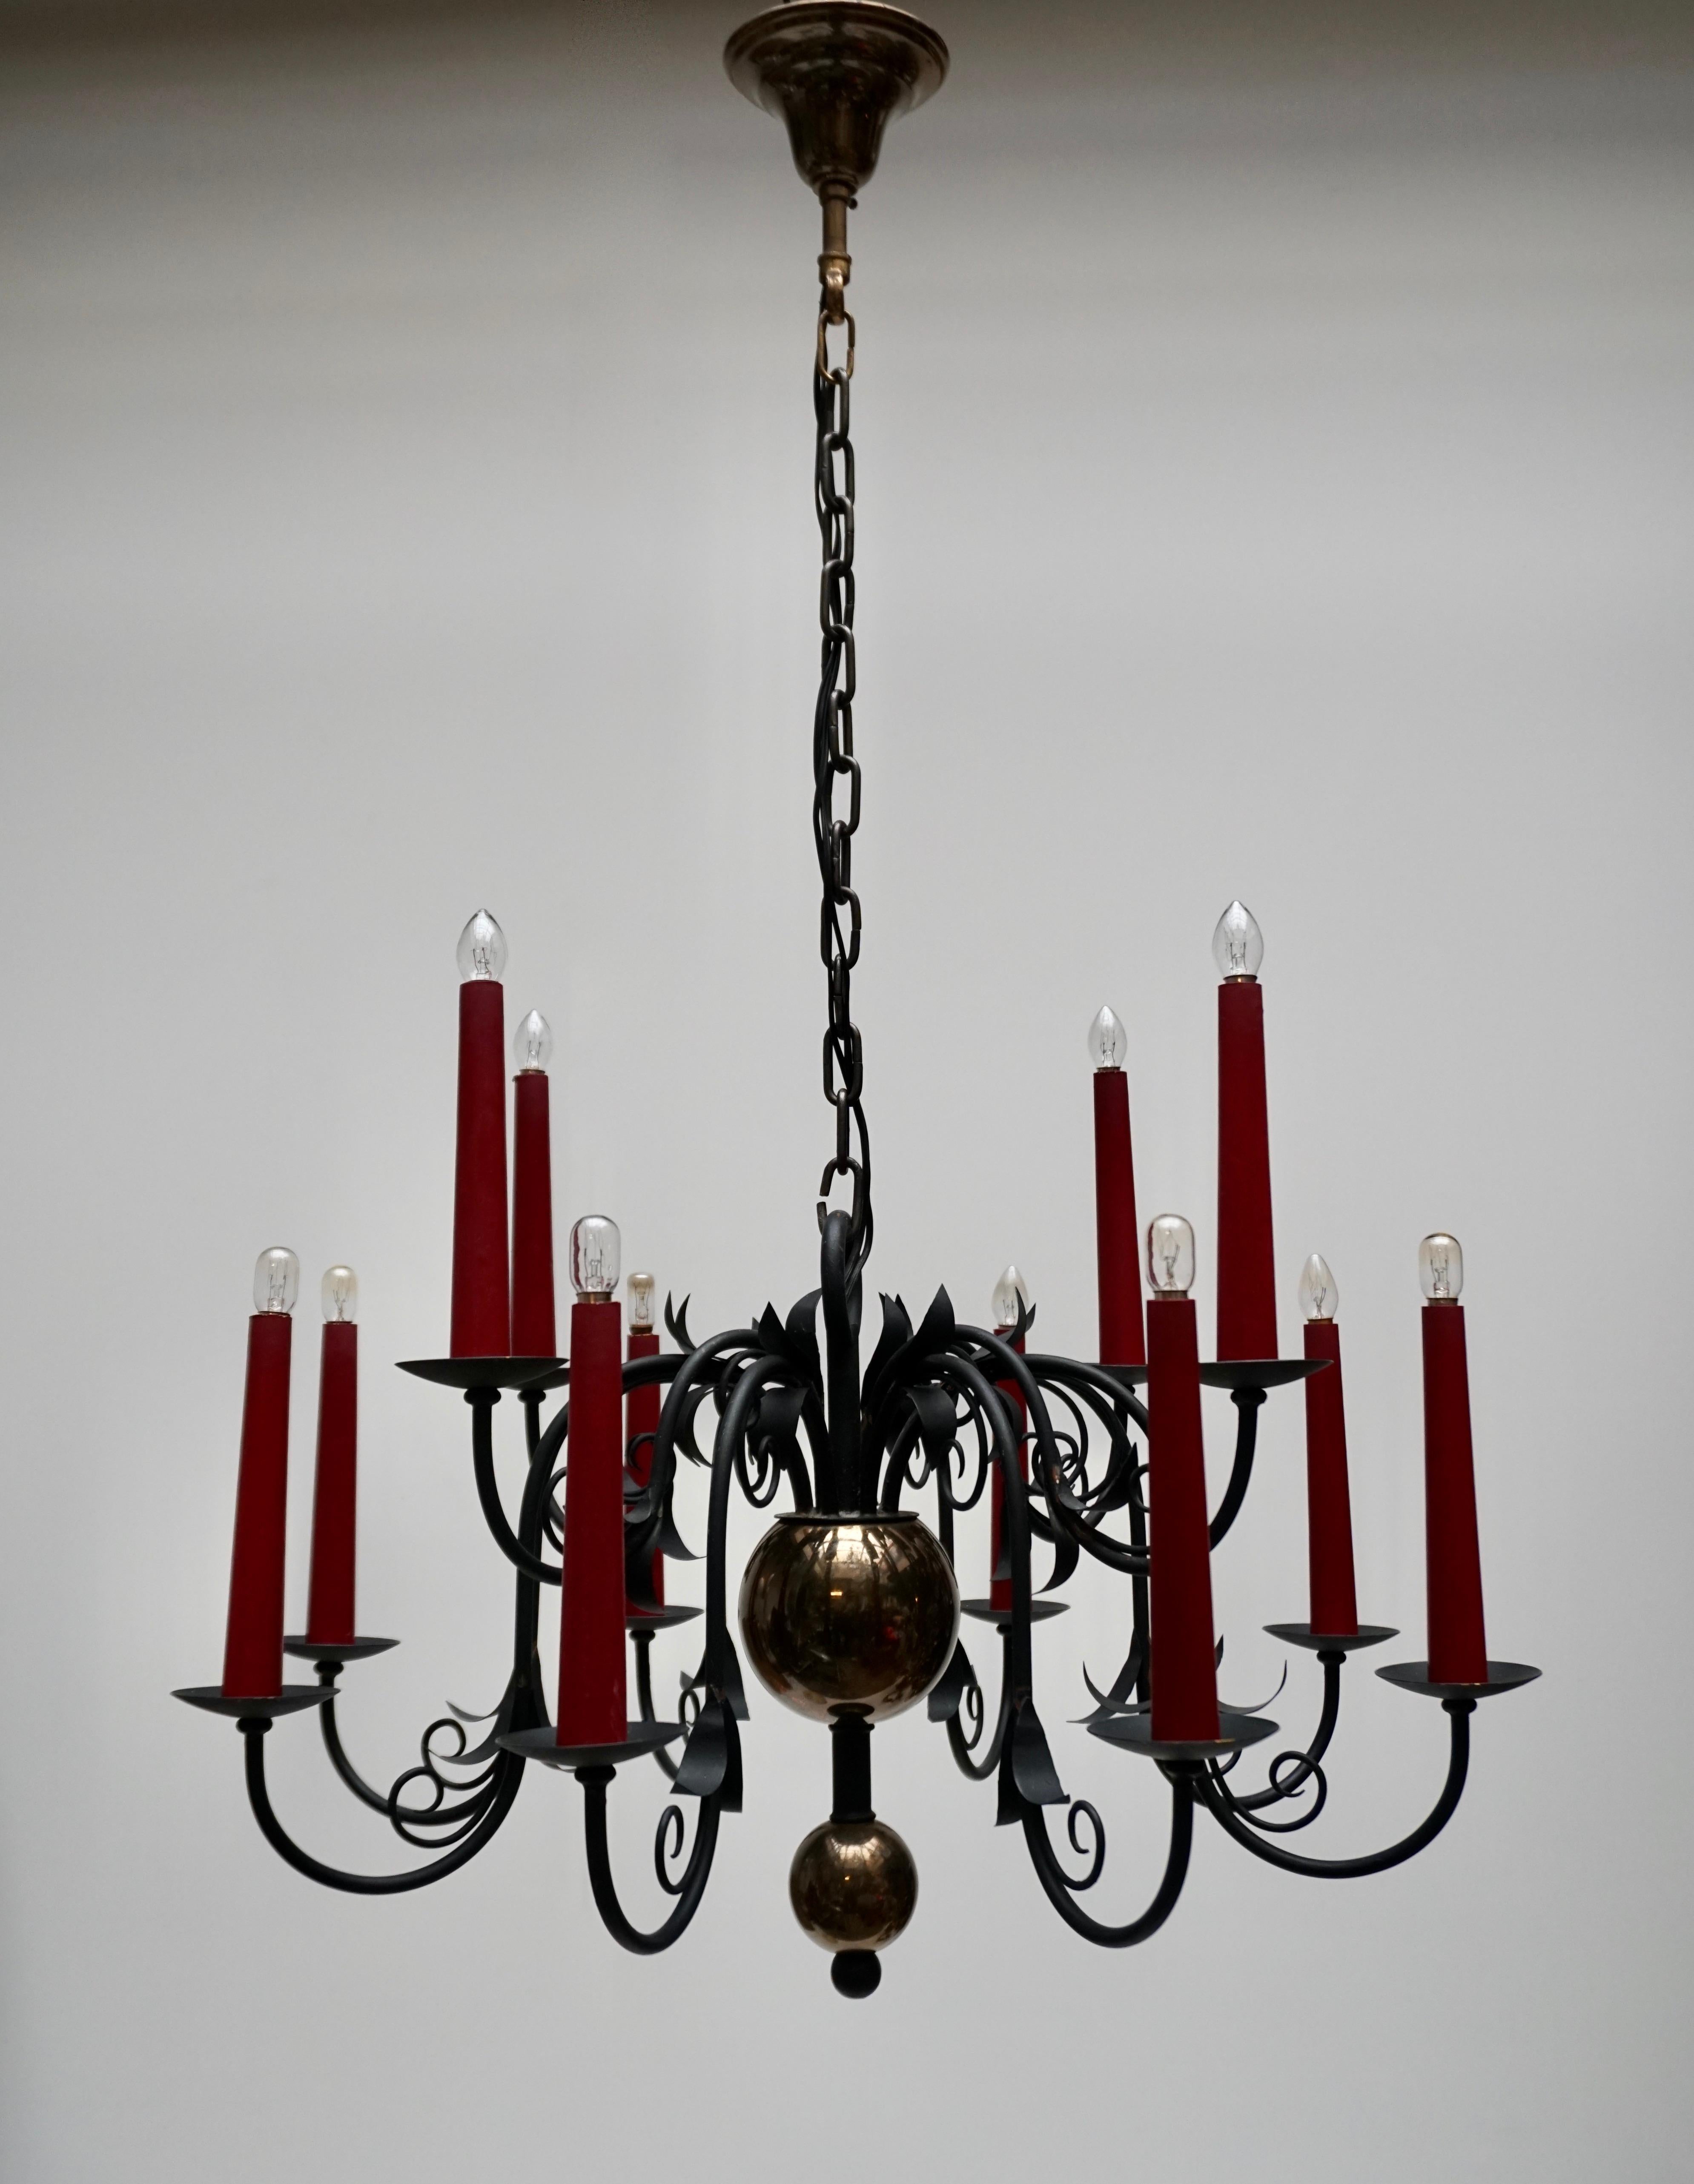 Metal 1950s Black Wrought Iron Gothic Chandelier with 12 Red Candlesticks